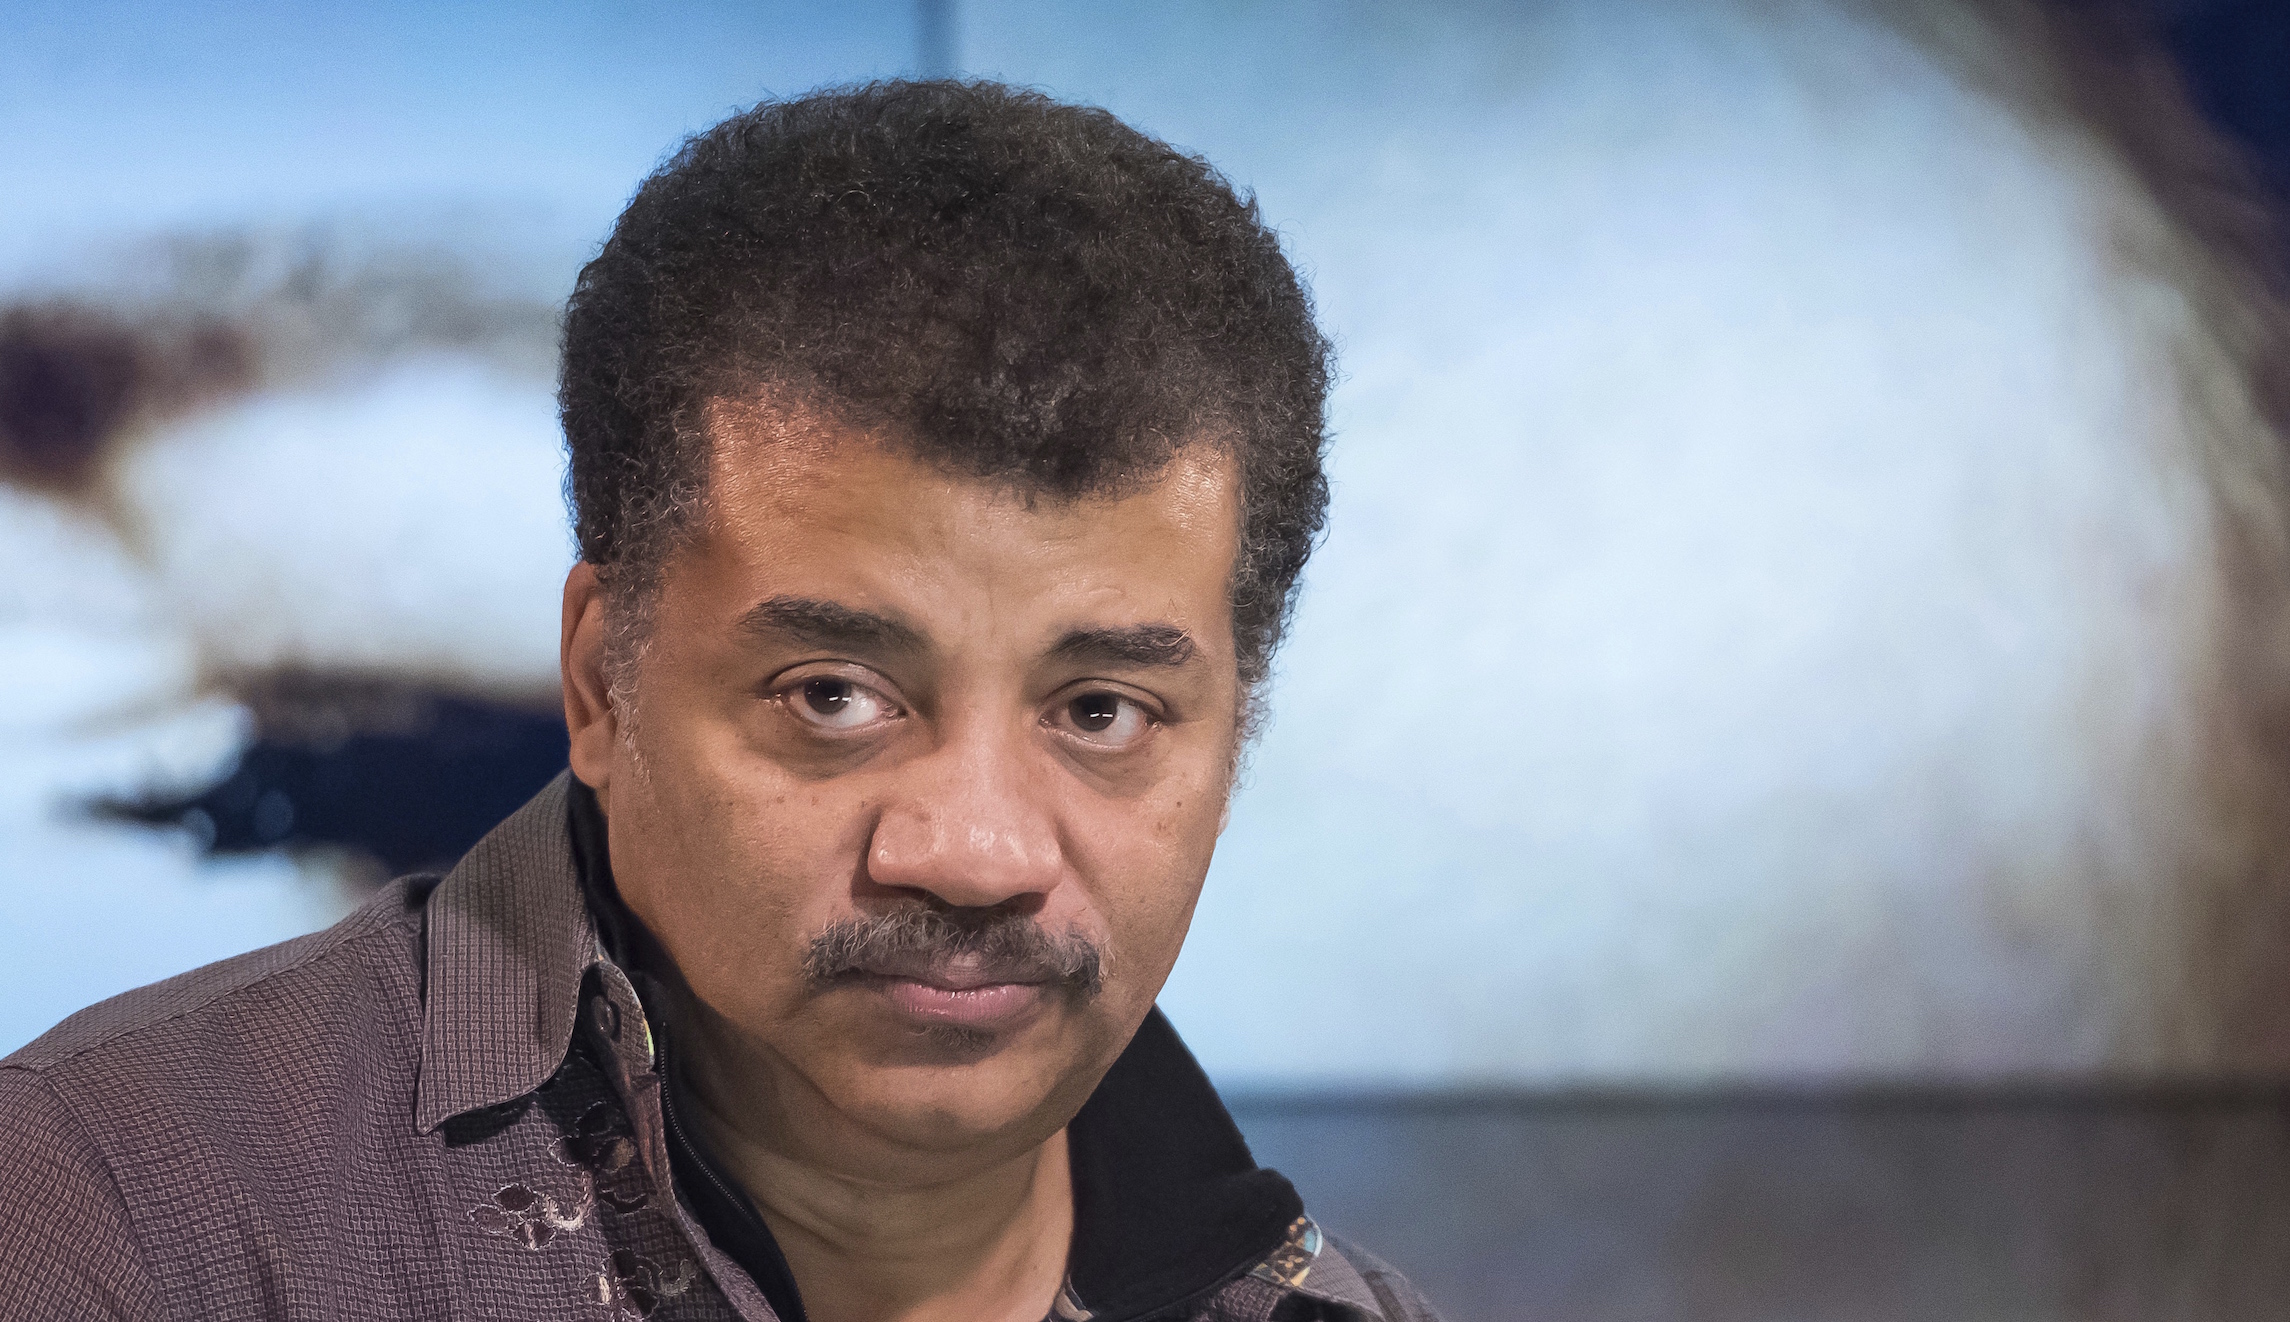 Astrophysicist Neil deGrasse Tyson says asteroid could reach Earth before Election Day - Washington Examiner